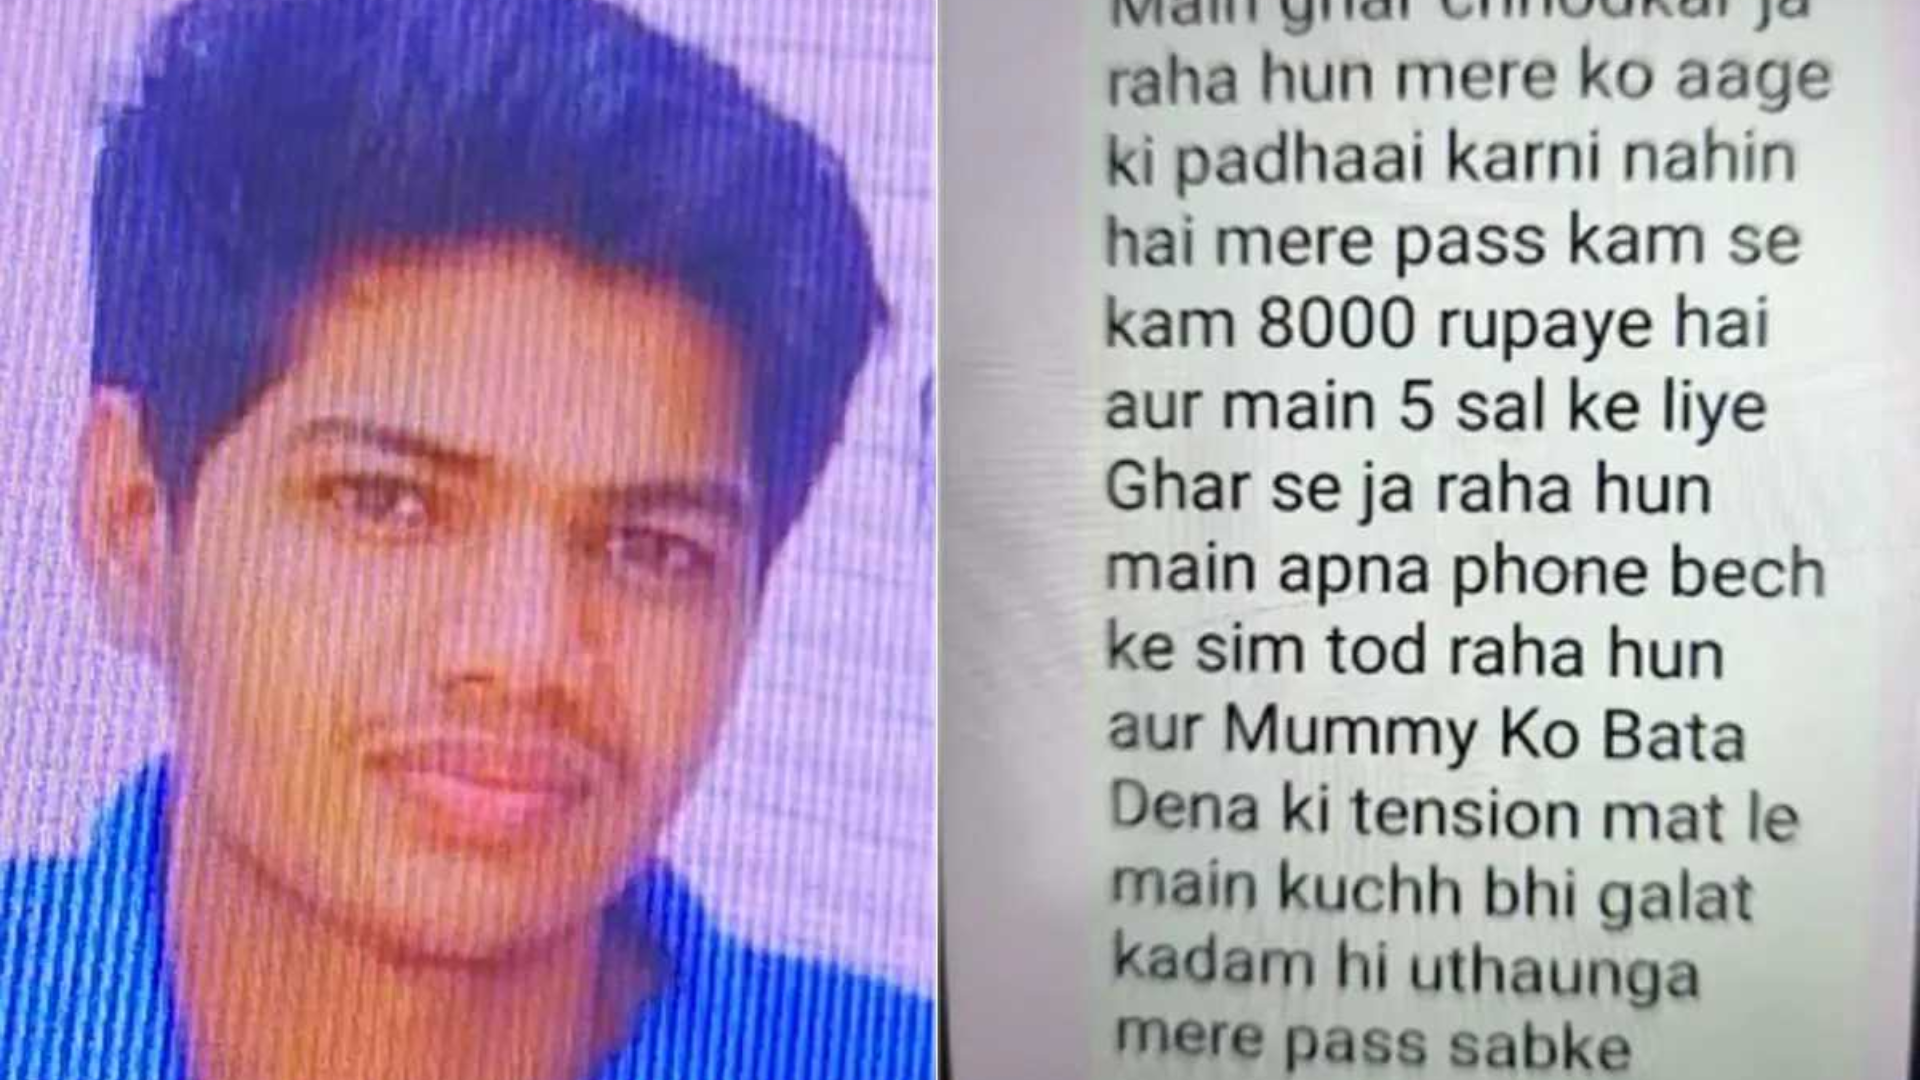 Leaving Home For 5 Years: NEET aspirant sends text to parents, goes missing from Kota